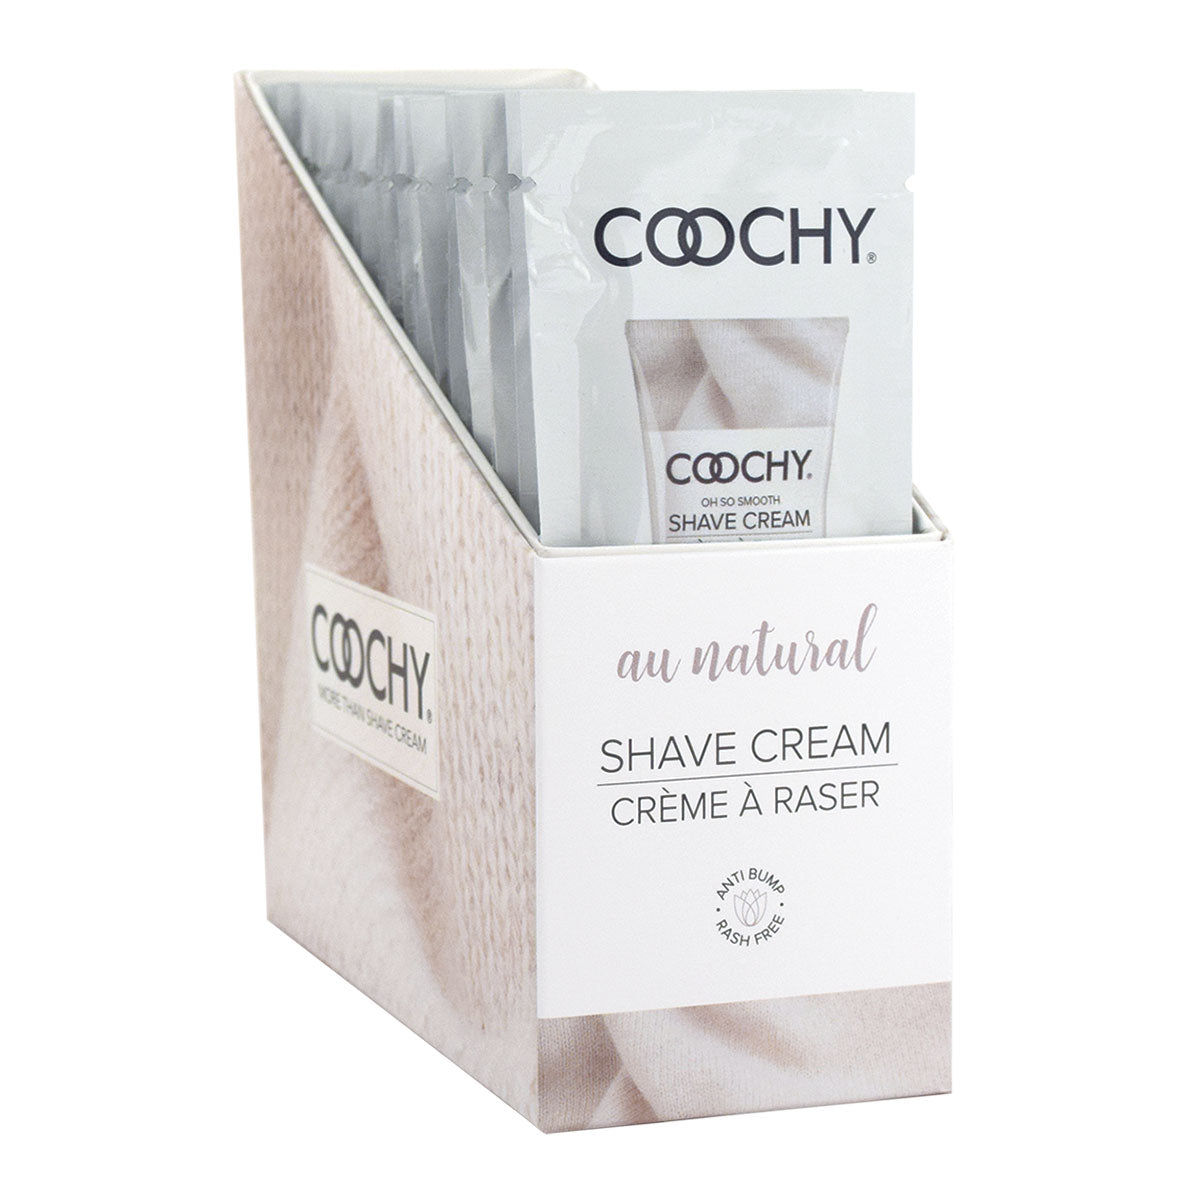 Coochy Shave Cream 15ml. 24pc. Display - Au Natural